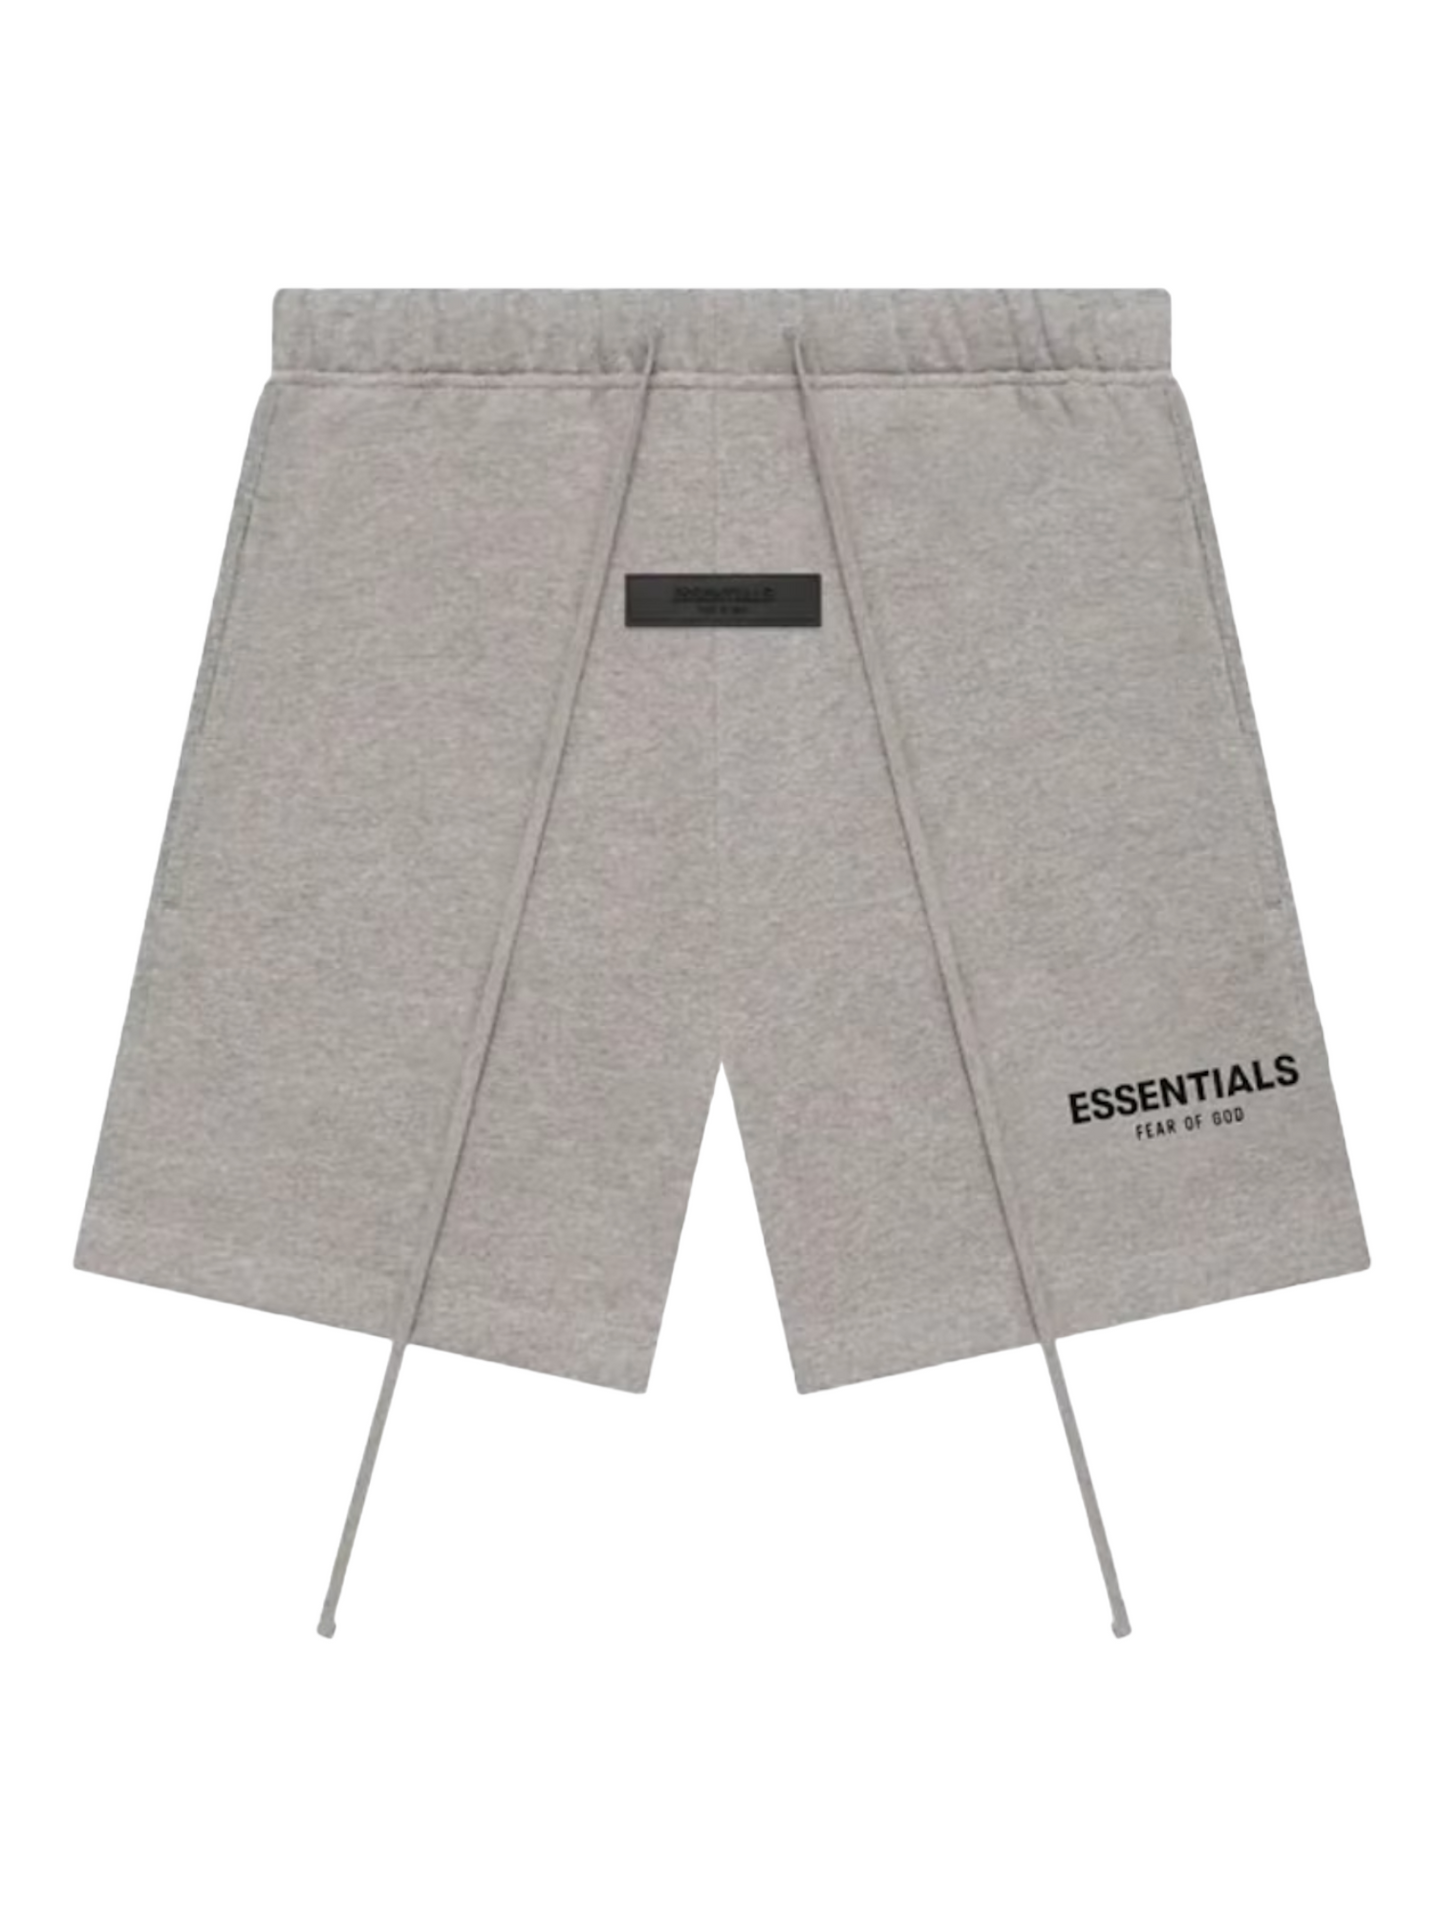 Essentials Fear of God Dark Oatmeal Fleece Shorts FW22 — Genuine Design Luxury Consignment Calgary, Alberta, Canada New and Pre-Owned Clothing, Shoes, Accessories.